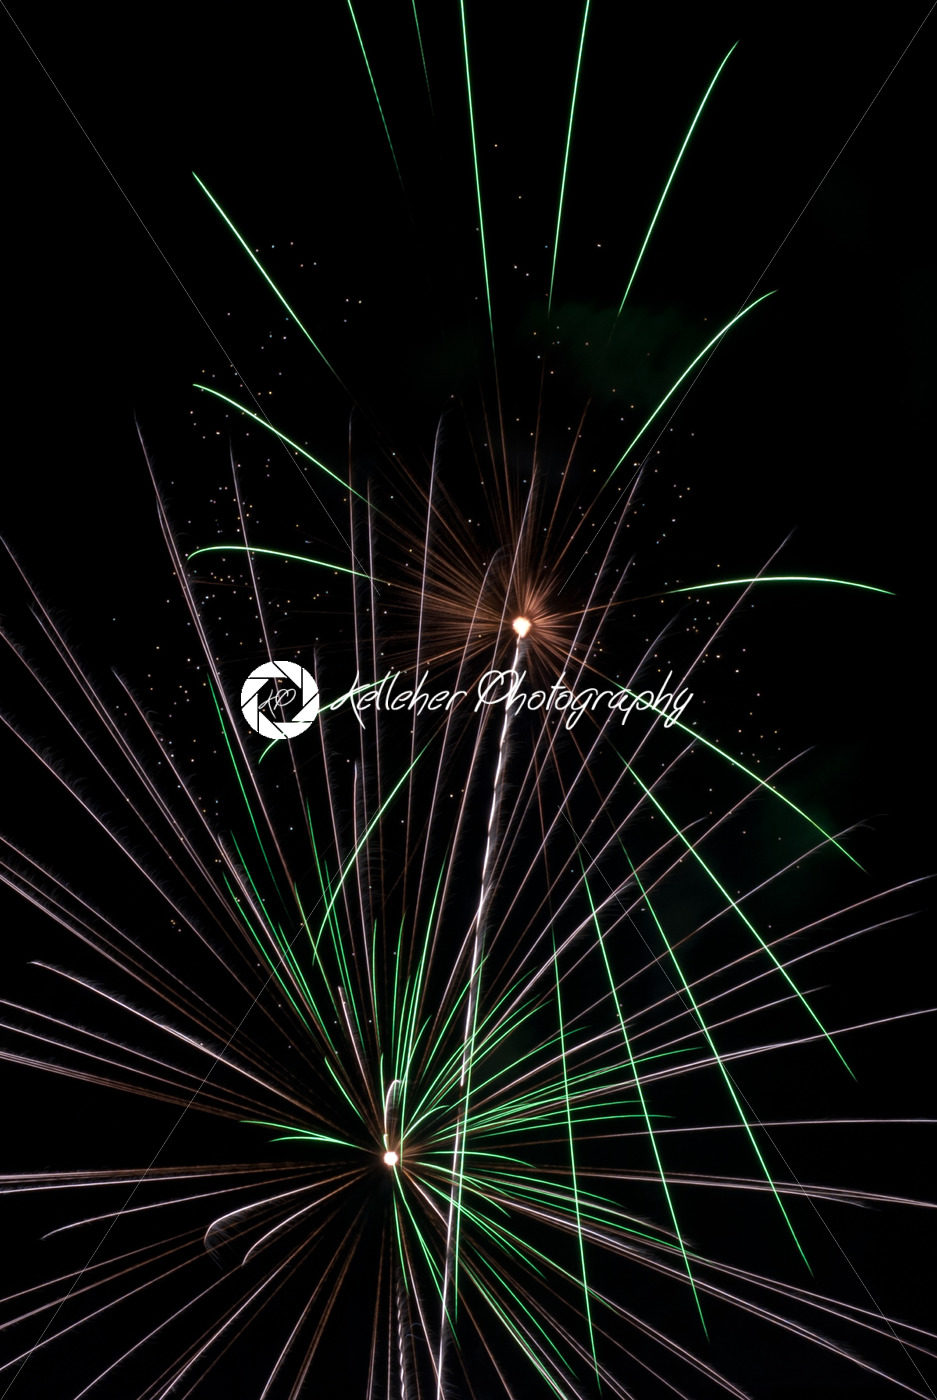 Fireworks light up the sky with dazzling display - Kelleher Photography Store